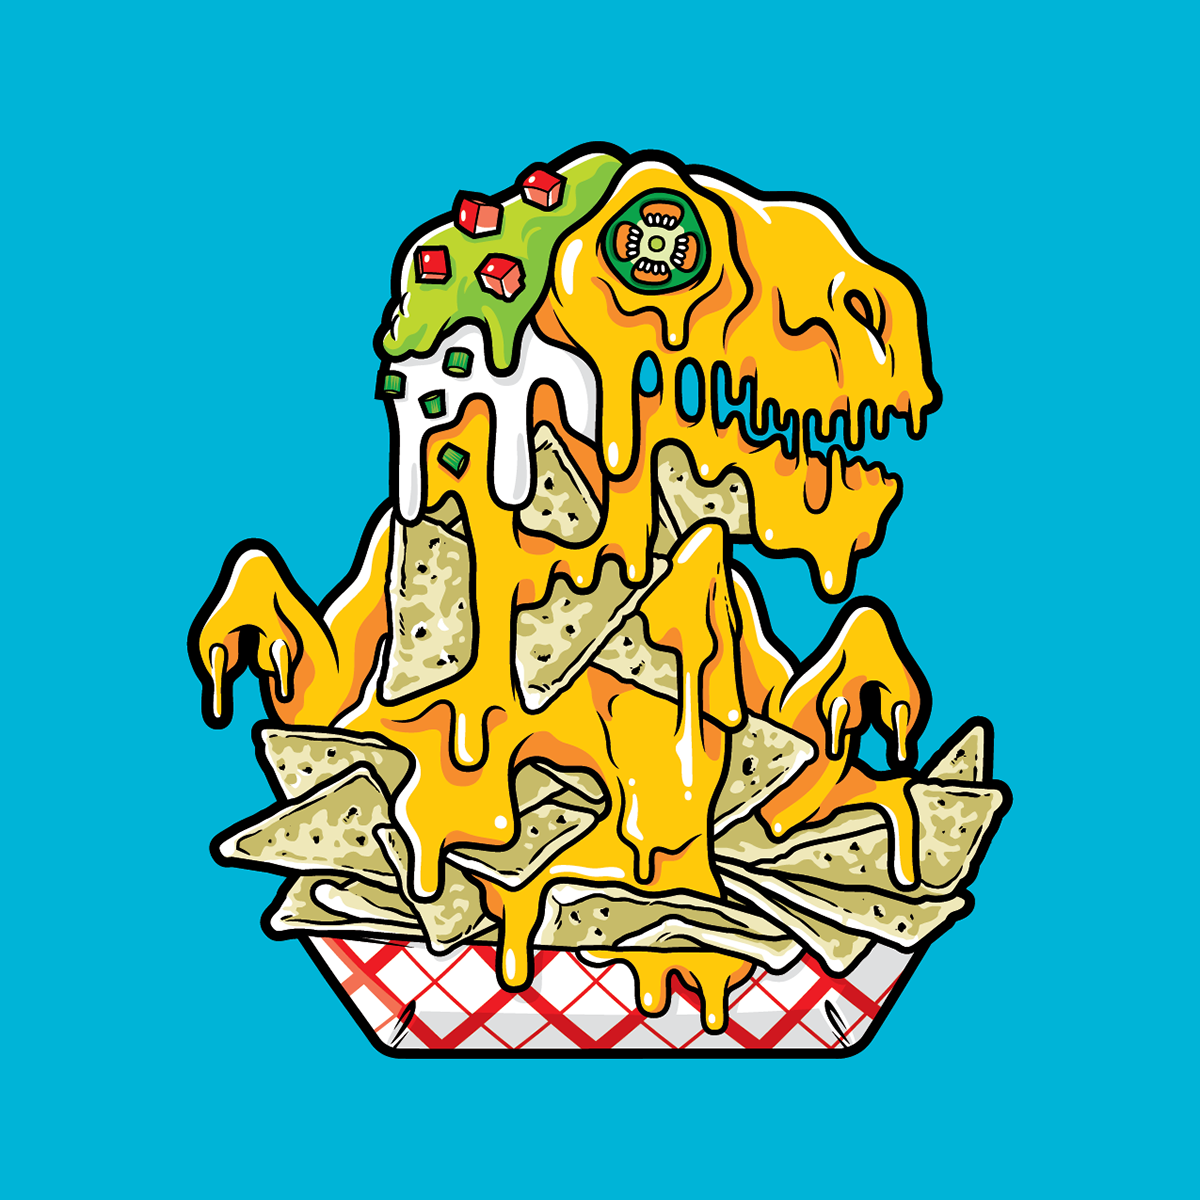 Cartoons feast beasts enamel pins tees dinosaurs junk food nachos french fries cupcakes creatures characters beasts monsters animals animated